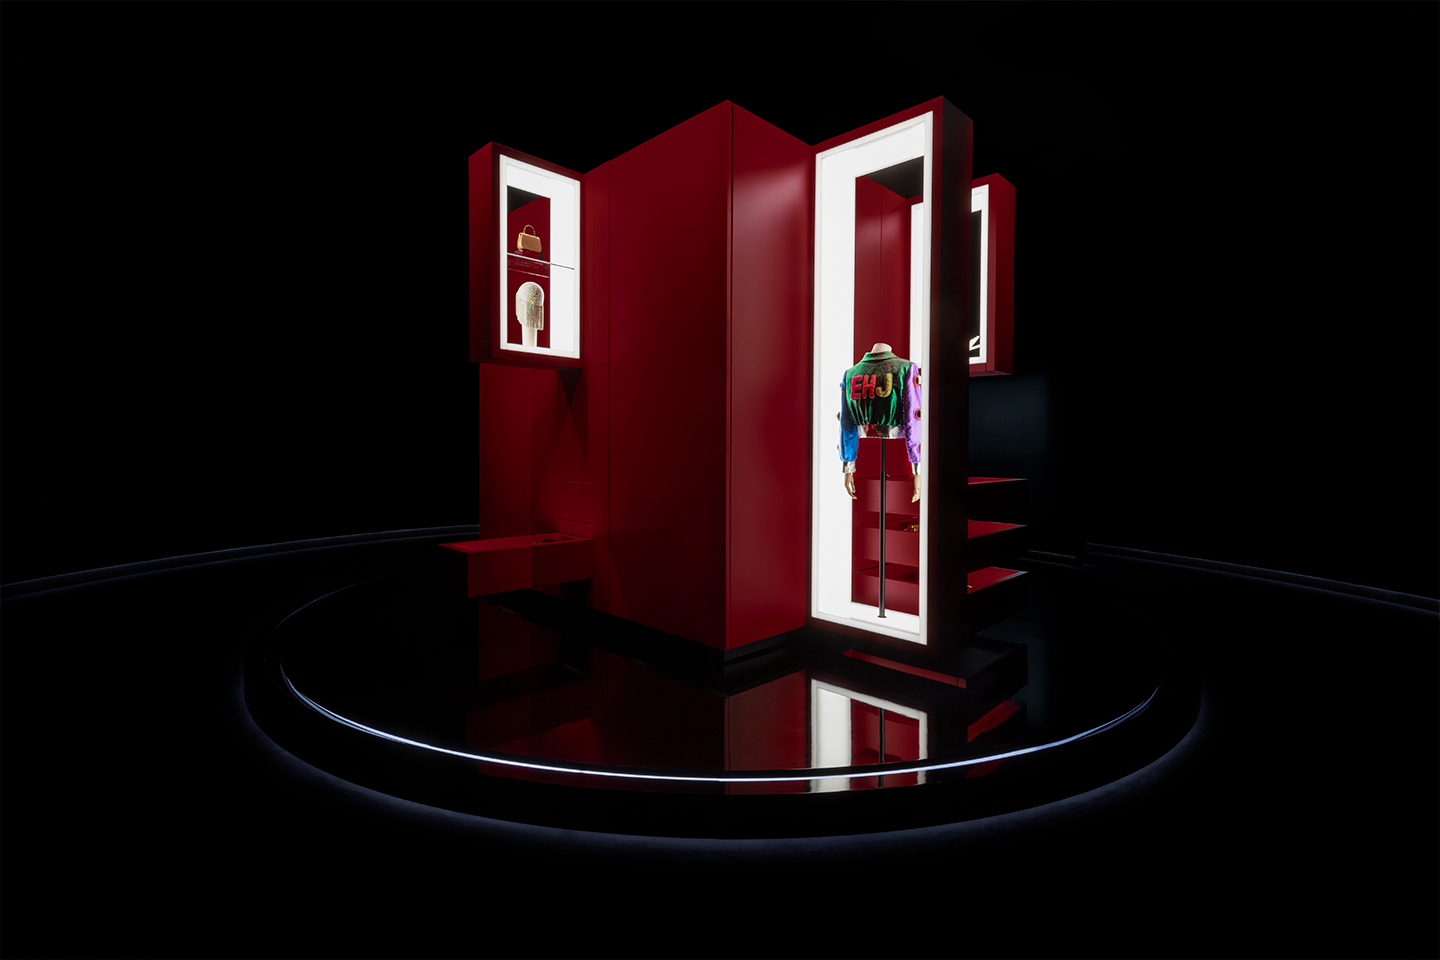 The ‘Cabinet of Wonders’ world at the Gucci Cosmos exhibition in London. Courtesy of Gucci